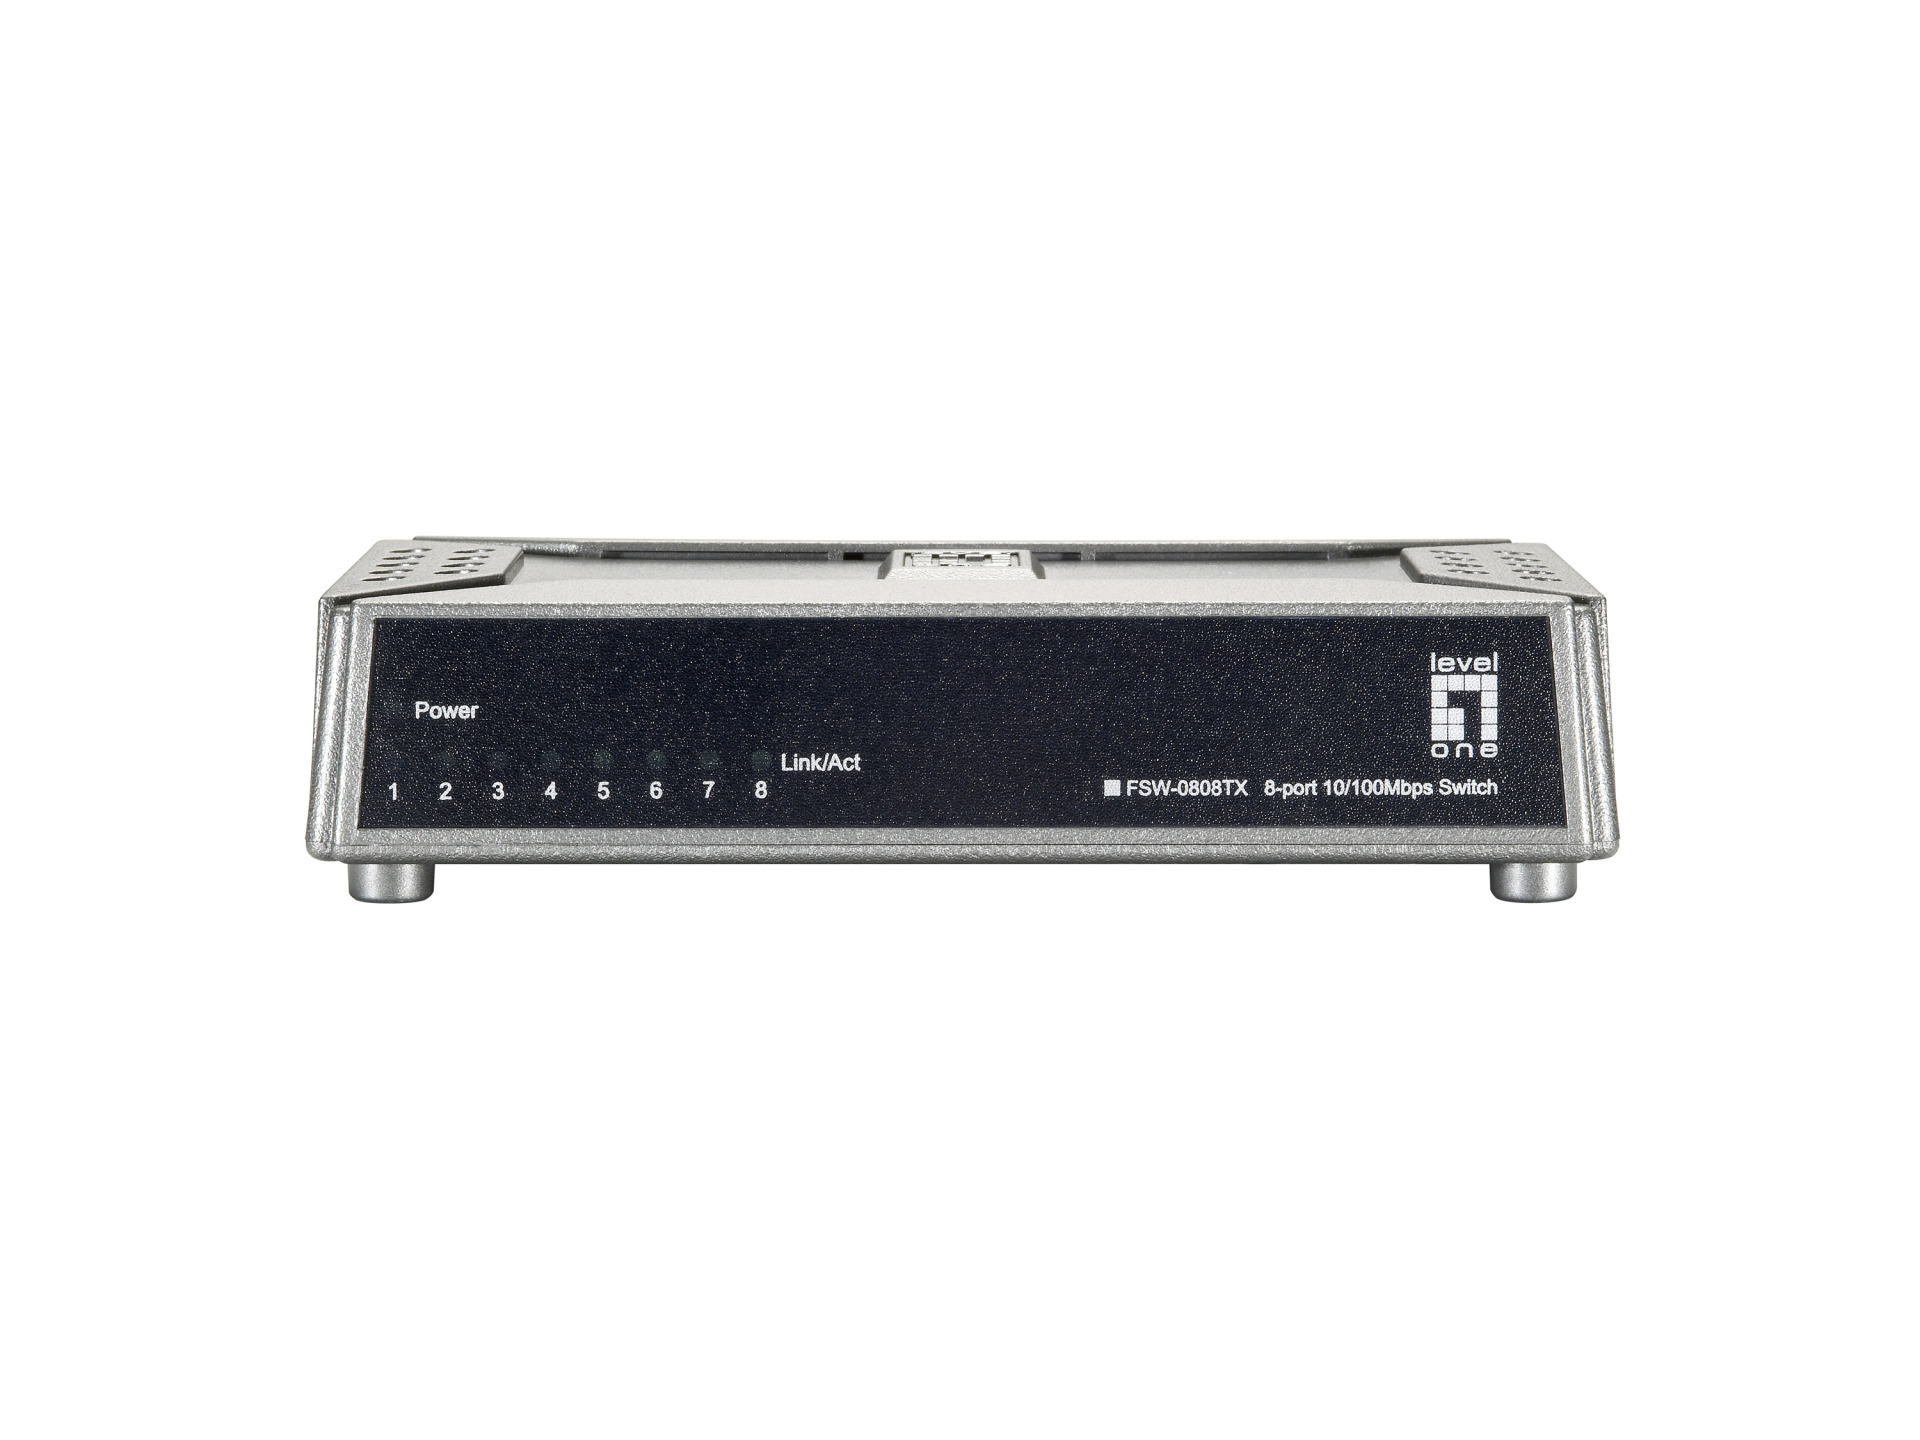 8-Port Fast Ethernet Switch, ultracompact